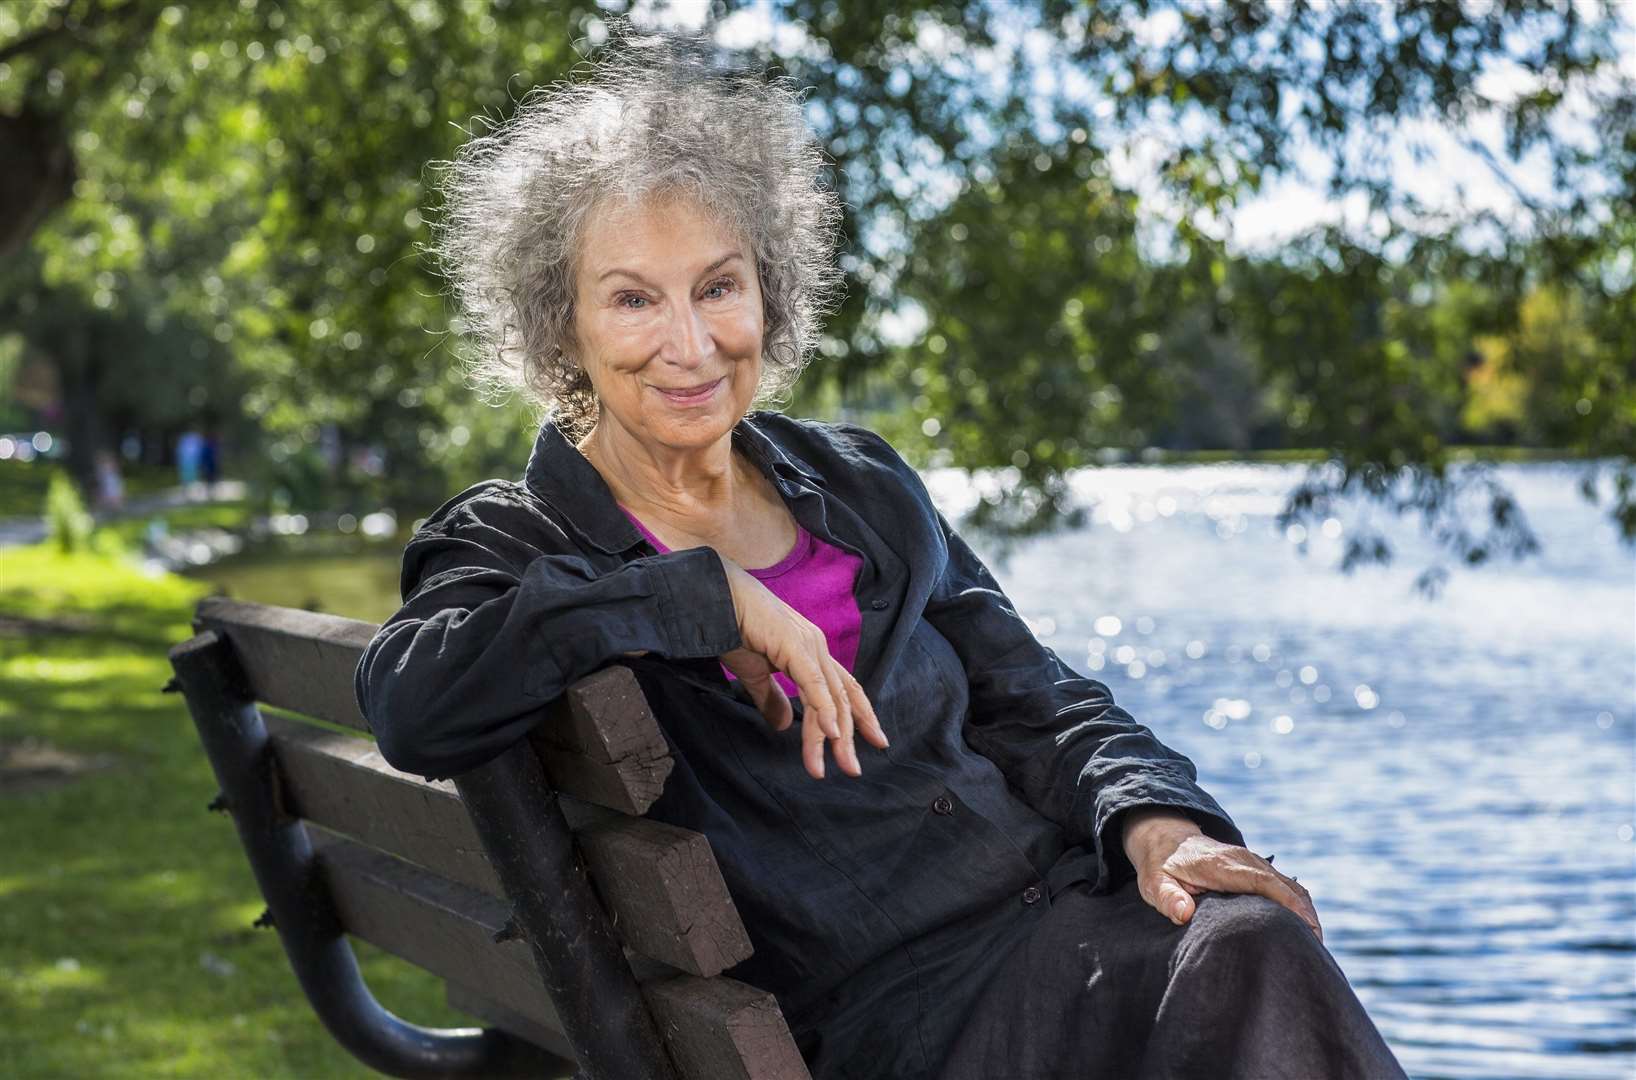 Author Margaret Atwood is set to publish her long-awaited sequel to The Handmaid's Tale